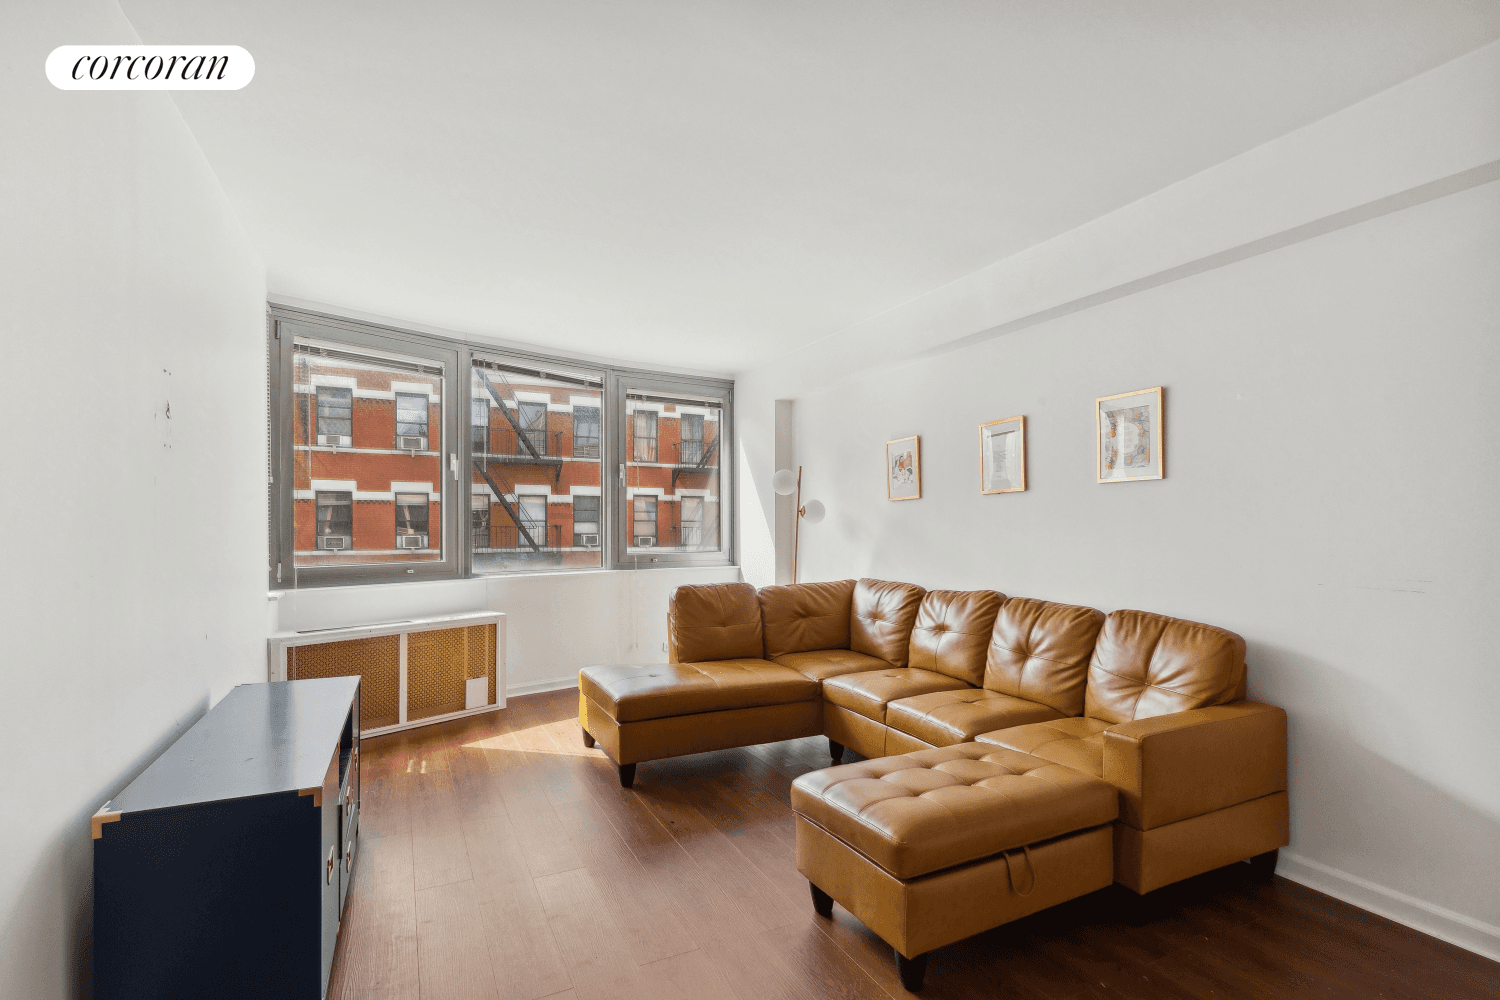 Prime Location Renovated One Bedroom in One of The Most Desirable Full Service Condo Buildings in Midtown West !